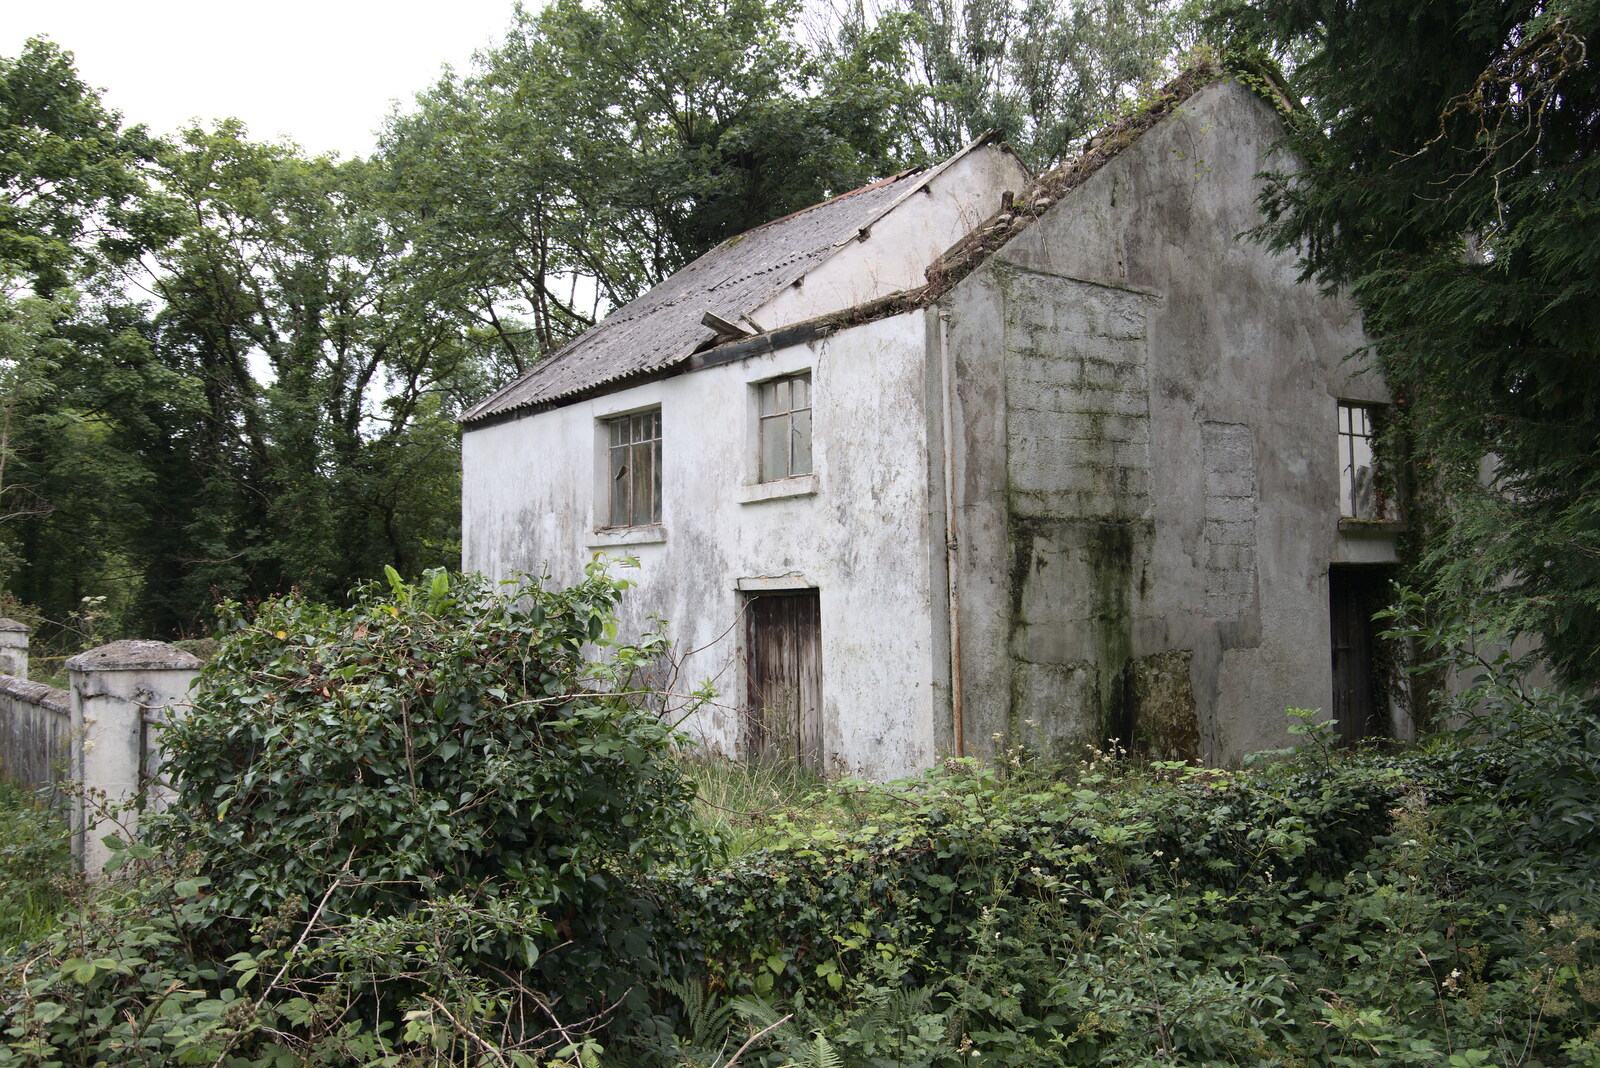 A Trip to Manorhamilton, County Leitrim, Ireland - 11th August 2021: A derelict house with half the roof missing